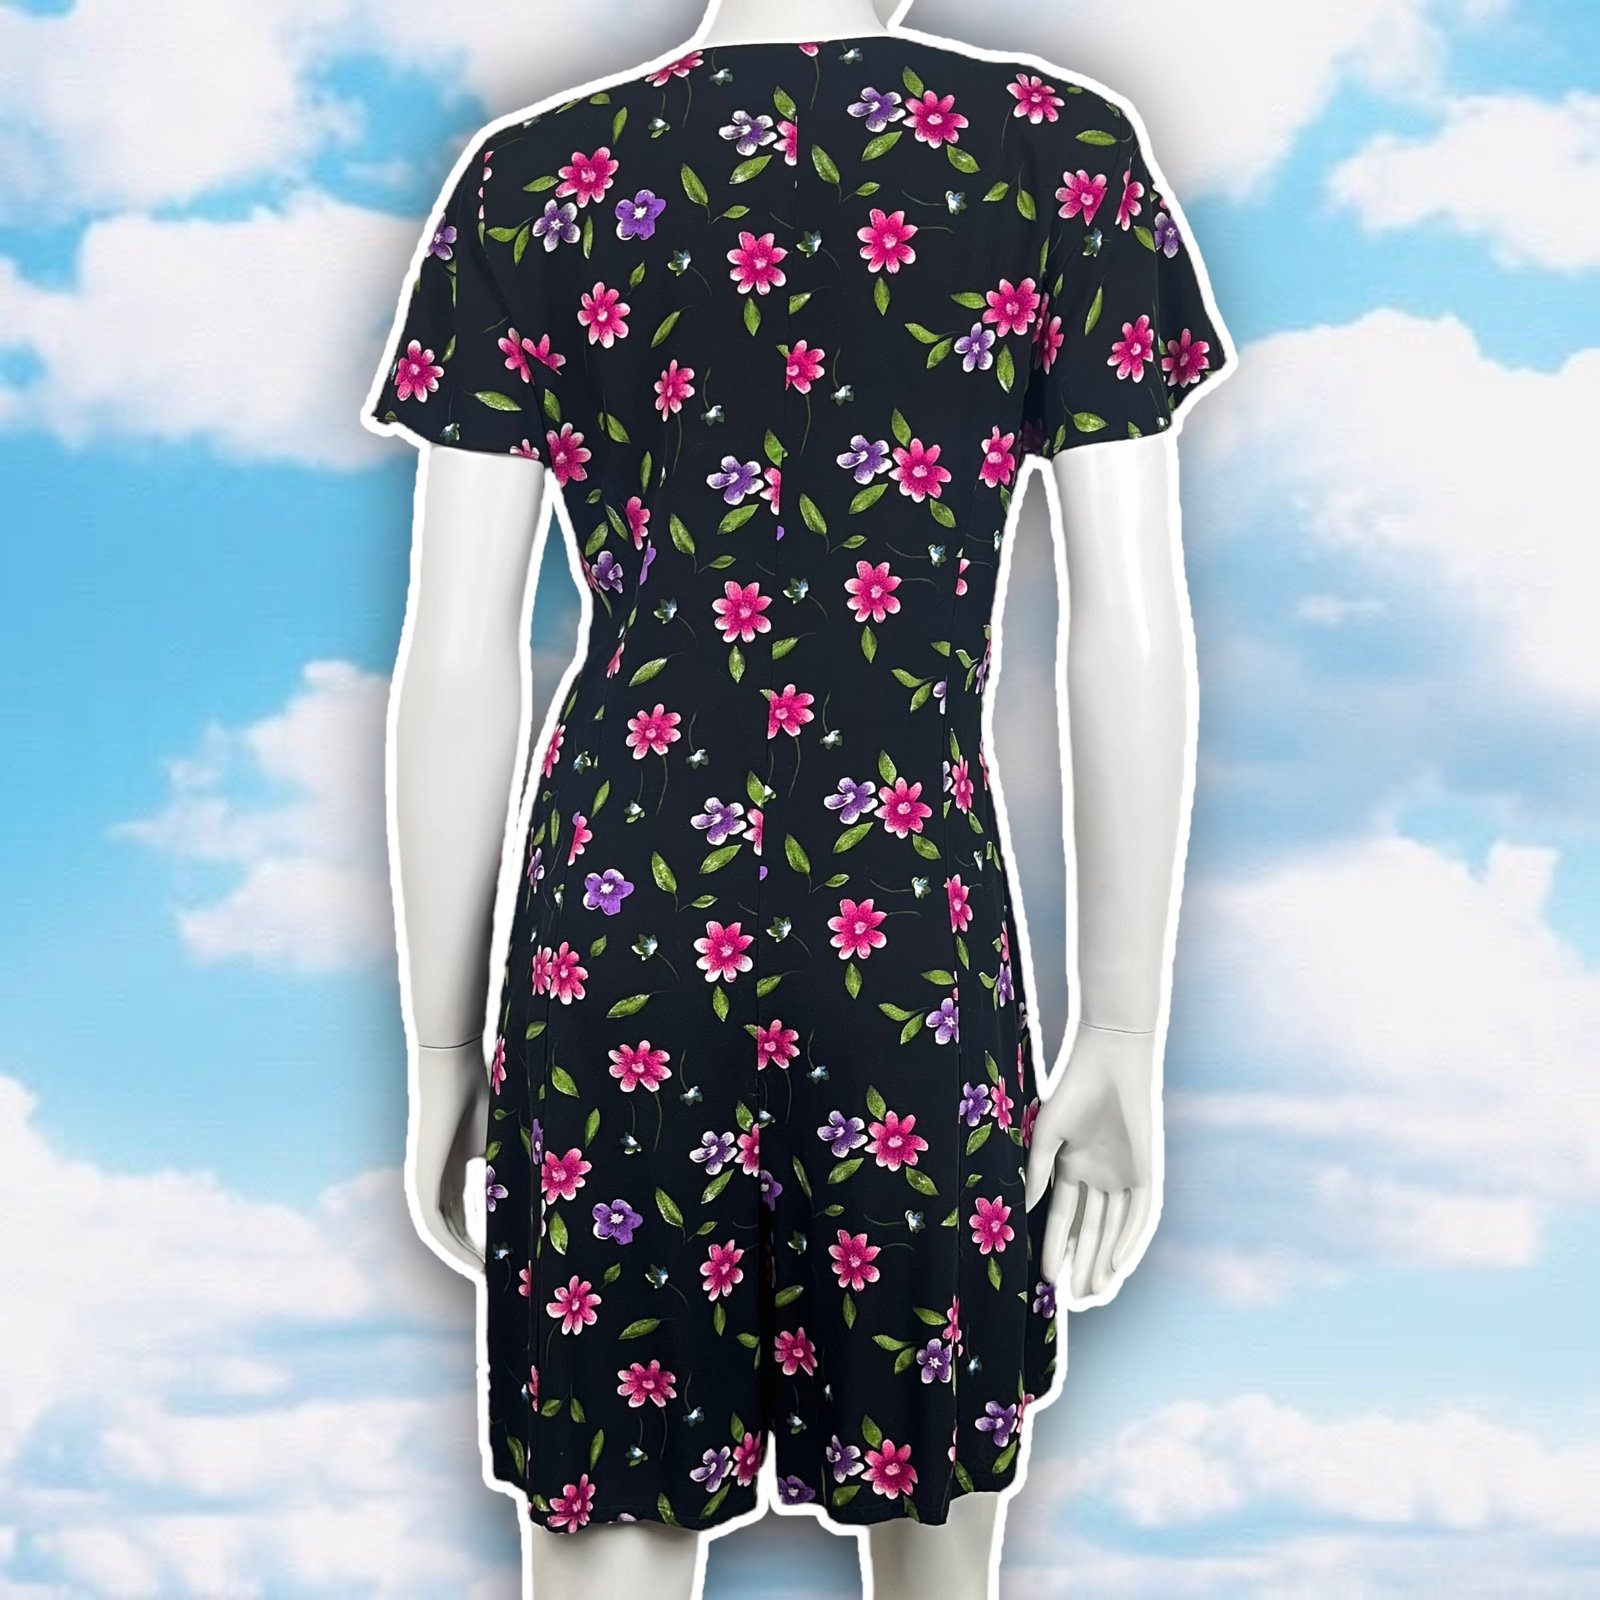 Wholesale price BASIC EDITIONS Vintage Floral Skort Romper Cottagecore Kidcore Prairie 90s Y2K PG8Oq36qe Buying Cheap